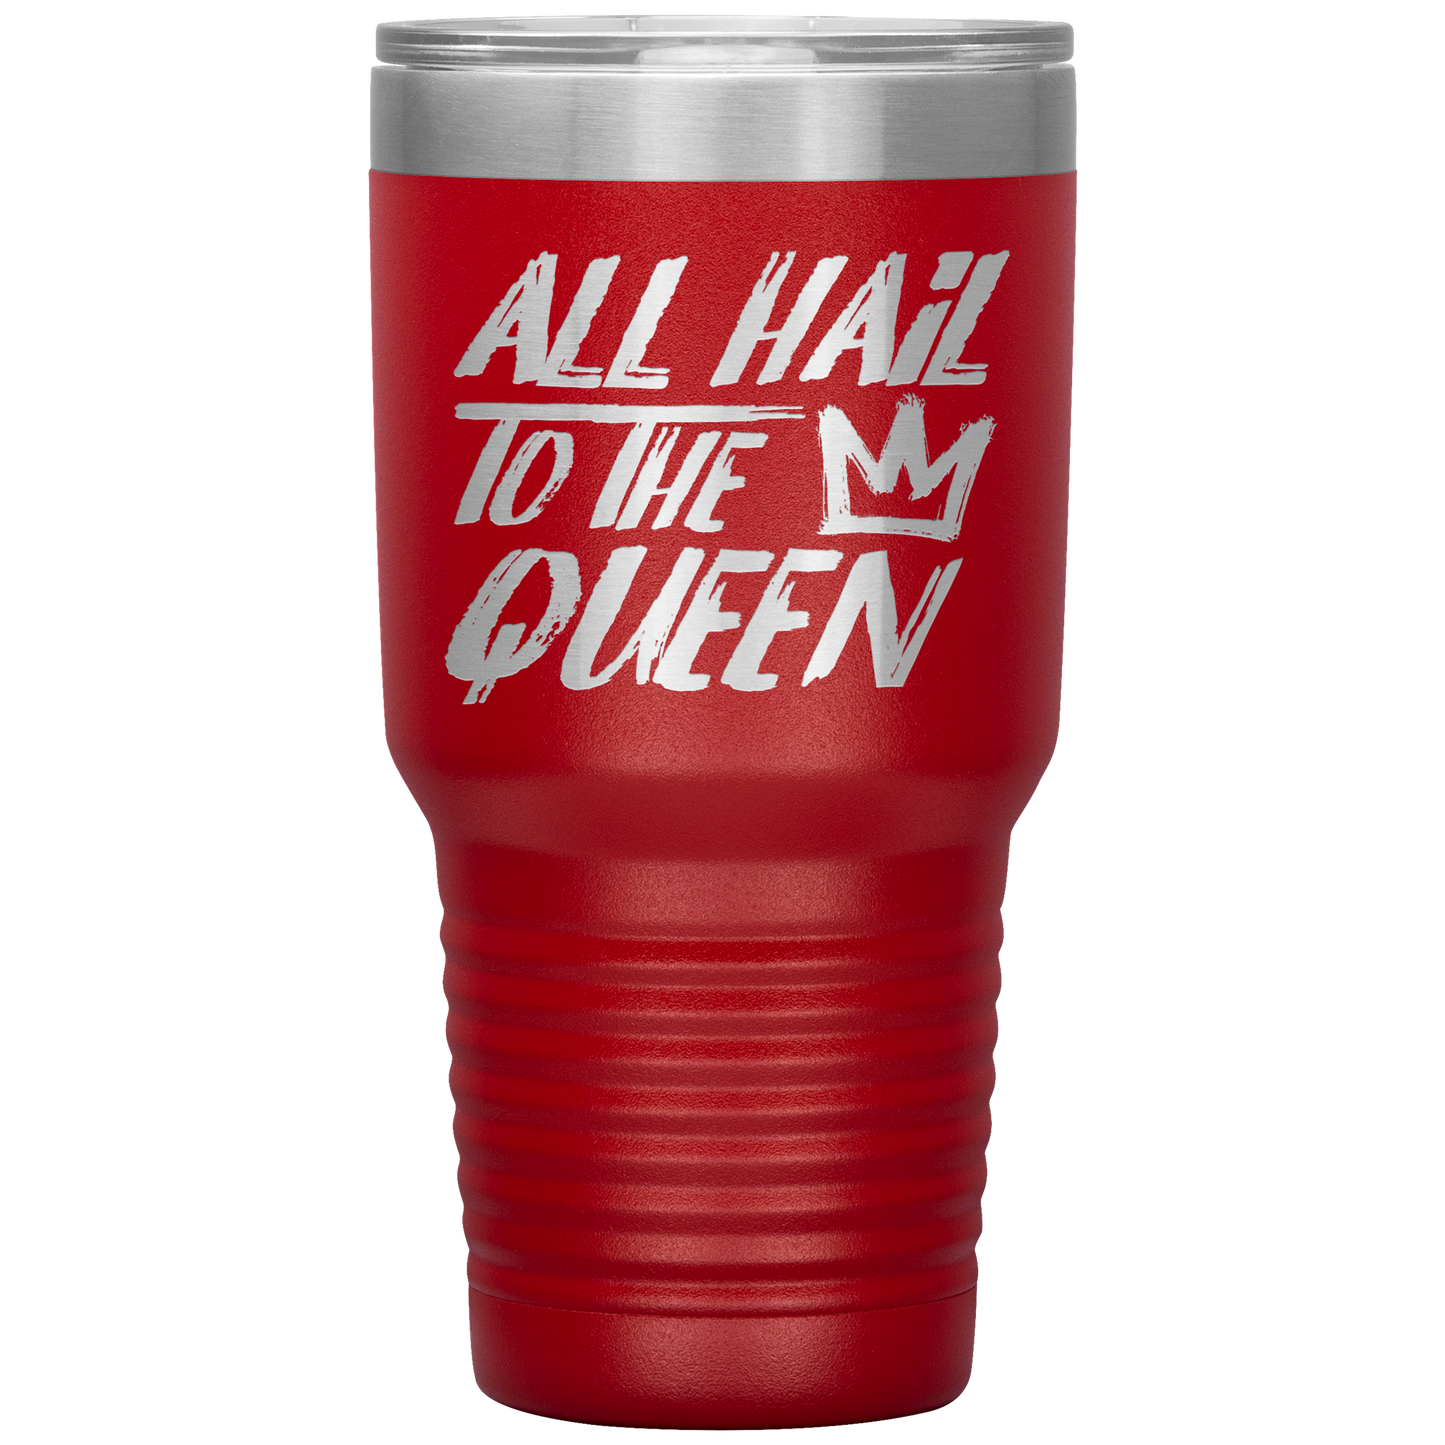 ALL HAIL TO THE QUEEN TUMBLER